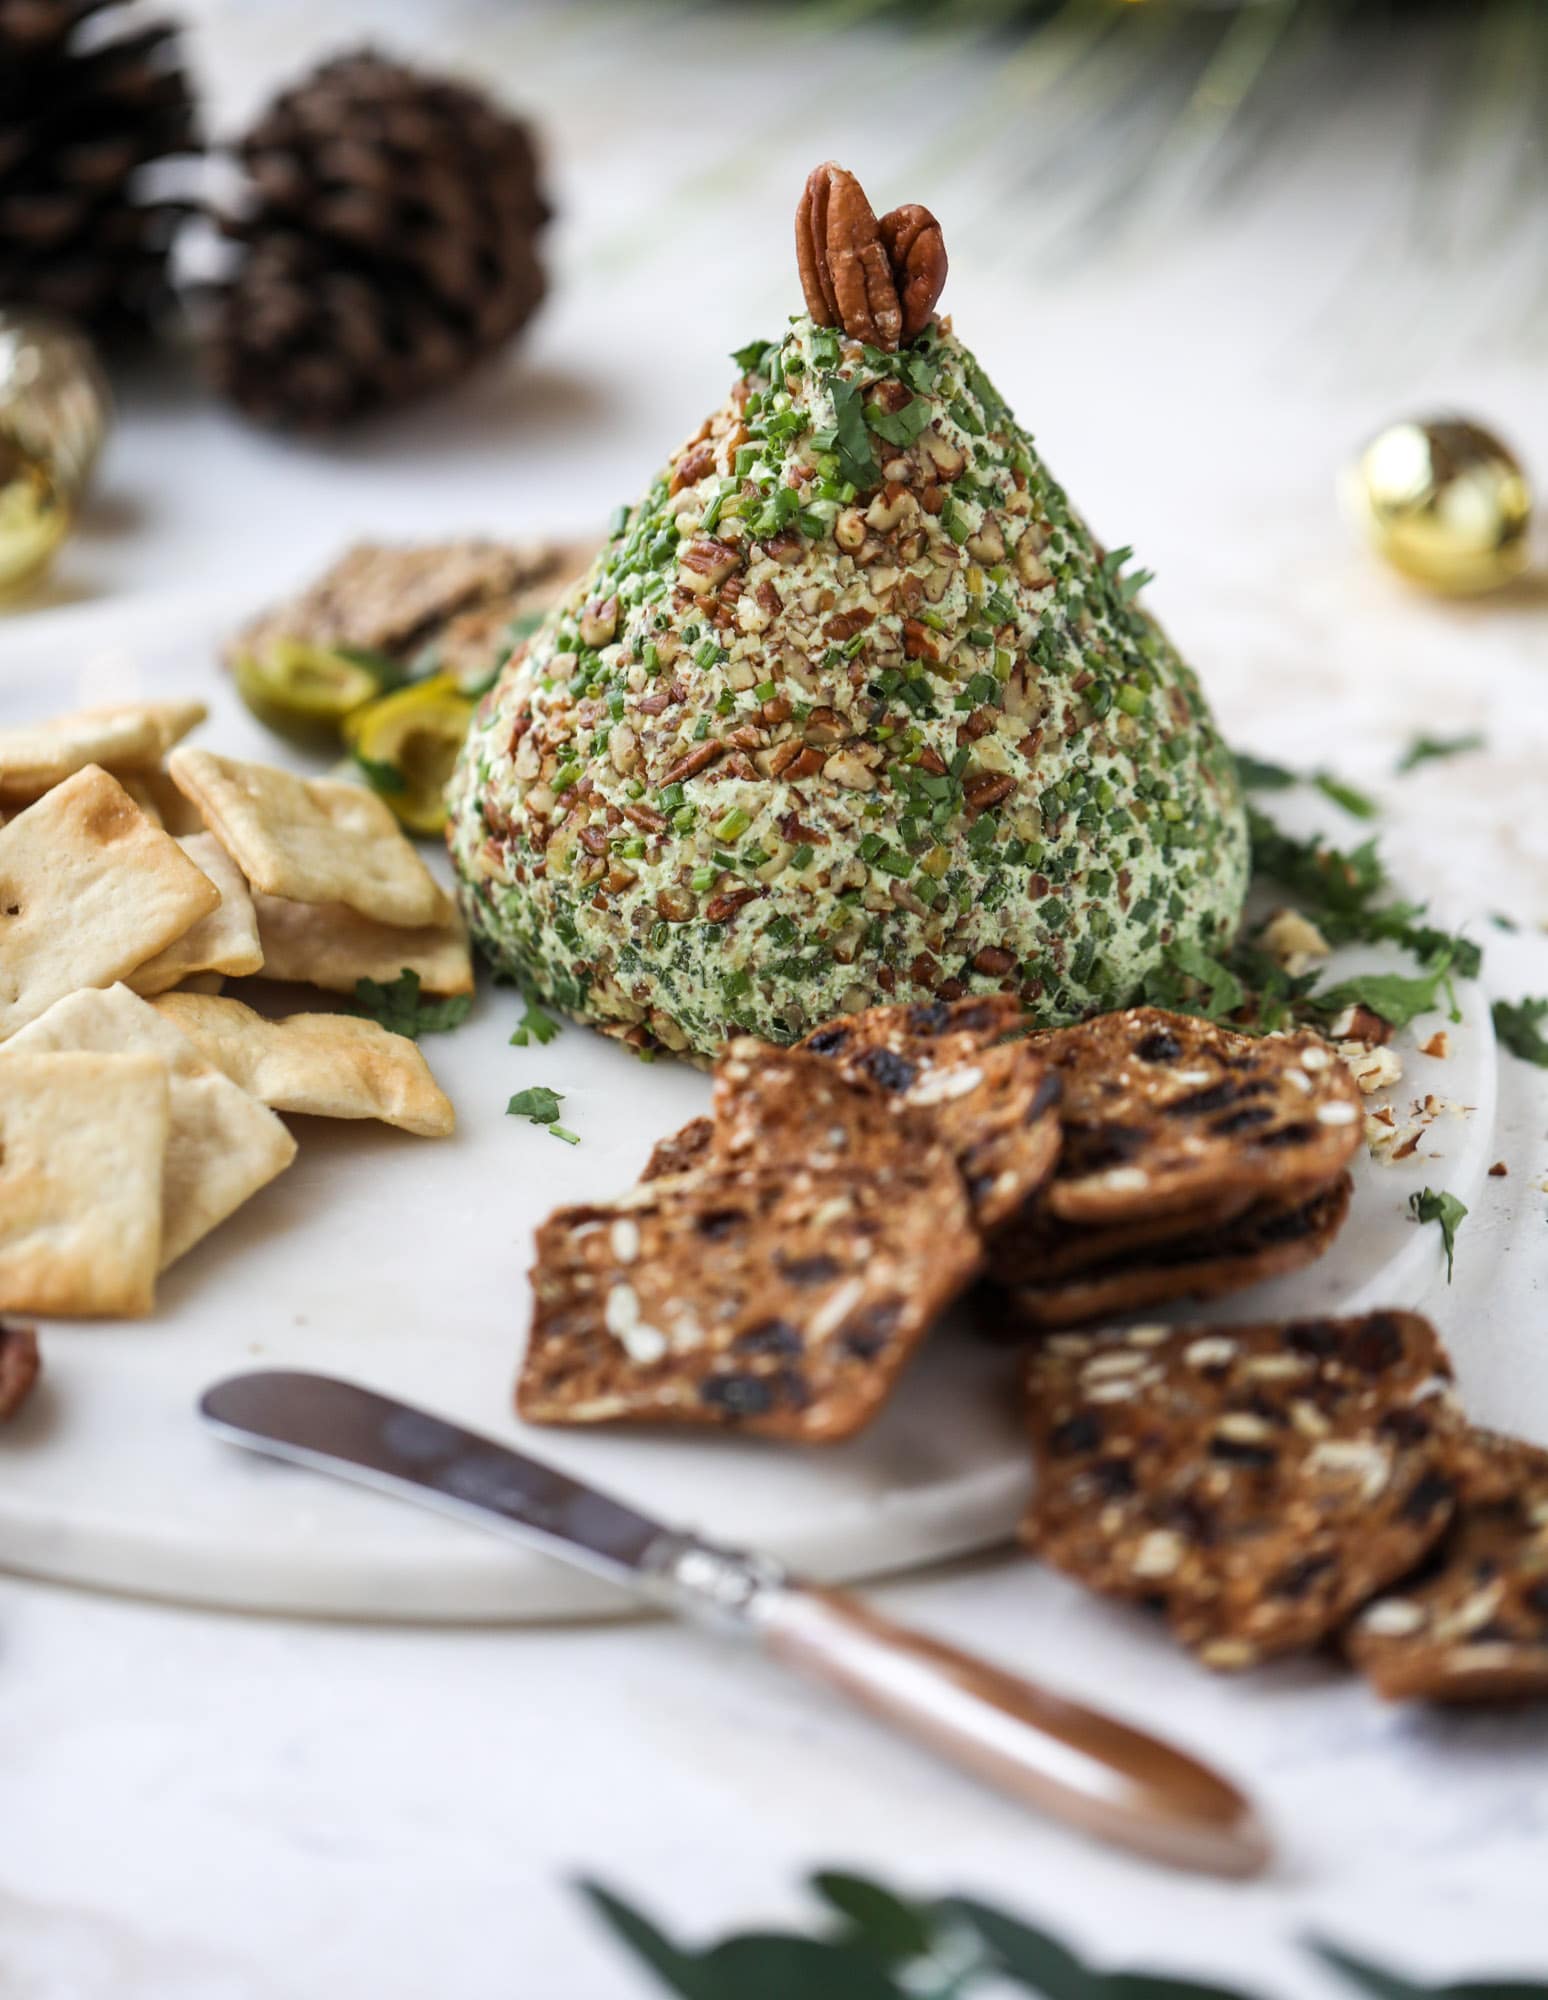 This green goddess cheese ball is the perfect party snack! You can make it ahead of time and shape it into a cute tree for a festive look. Serve it with crispy crackers and pita chips! I howsweeteats.com #greengoddess #cheeseball